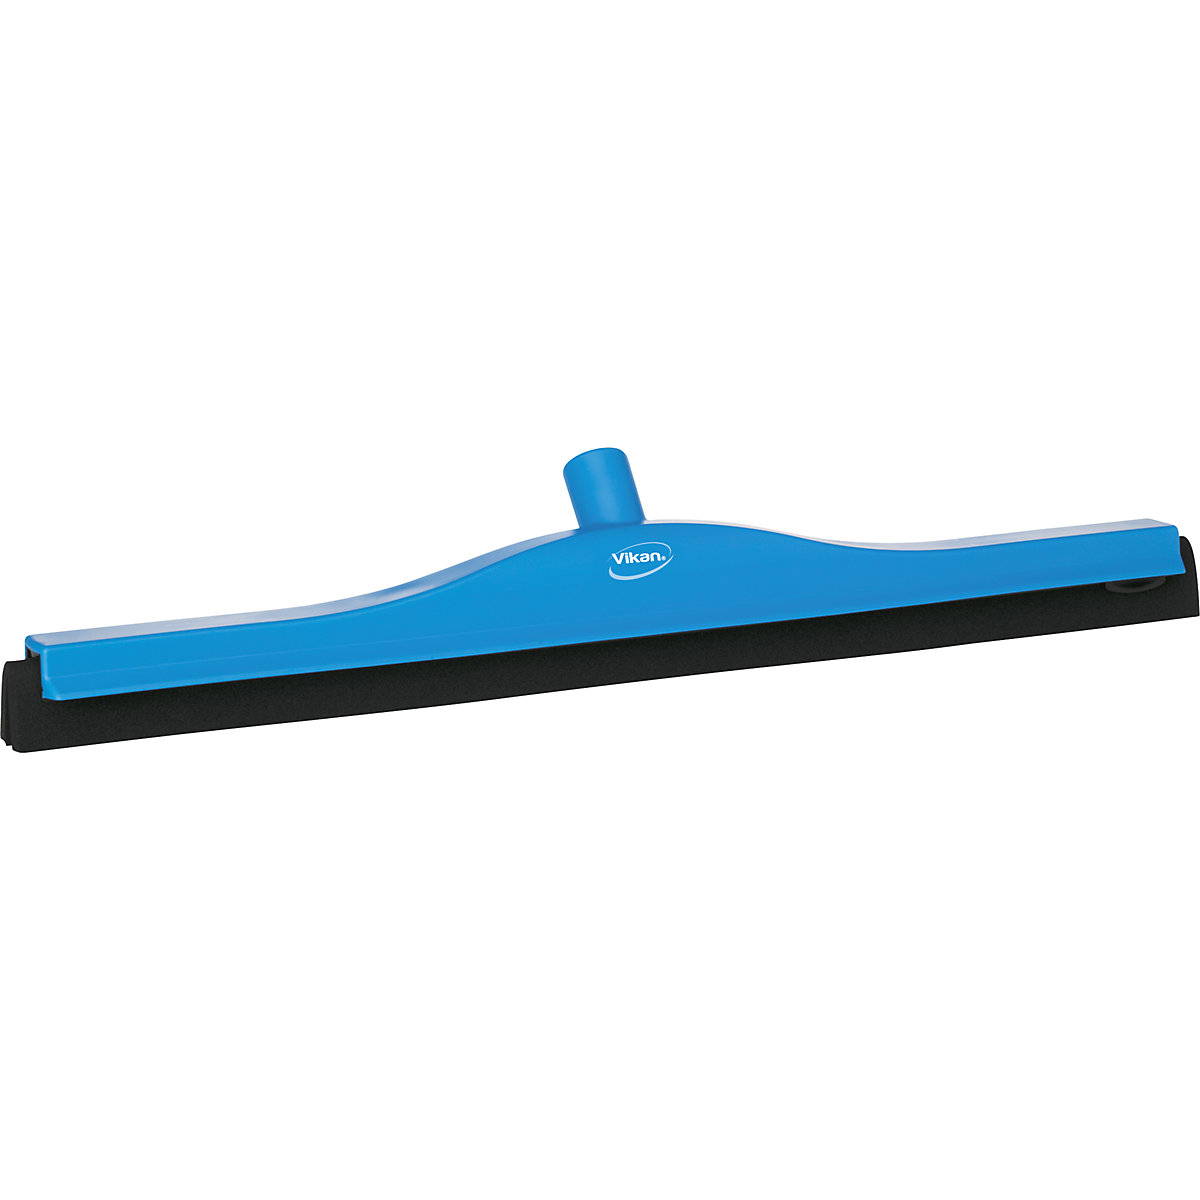 Water wiper with replaceable cartridge - Vikan